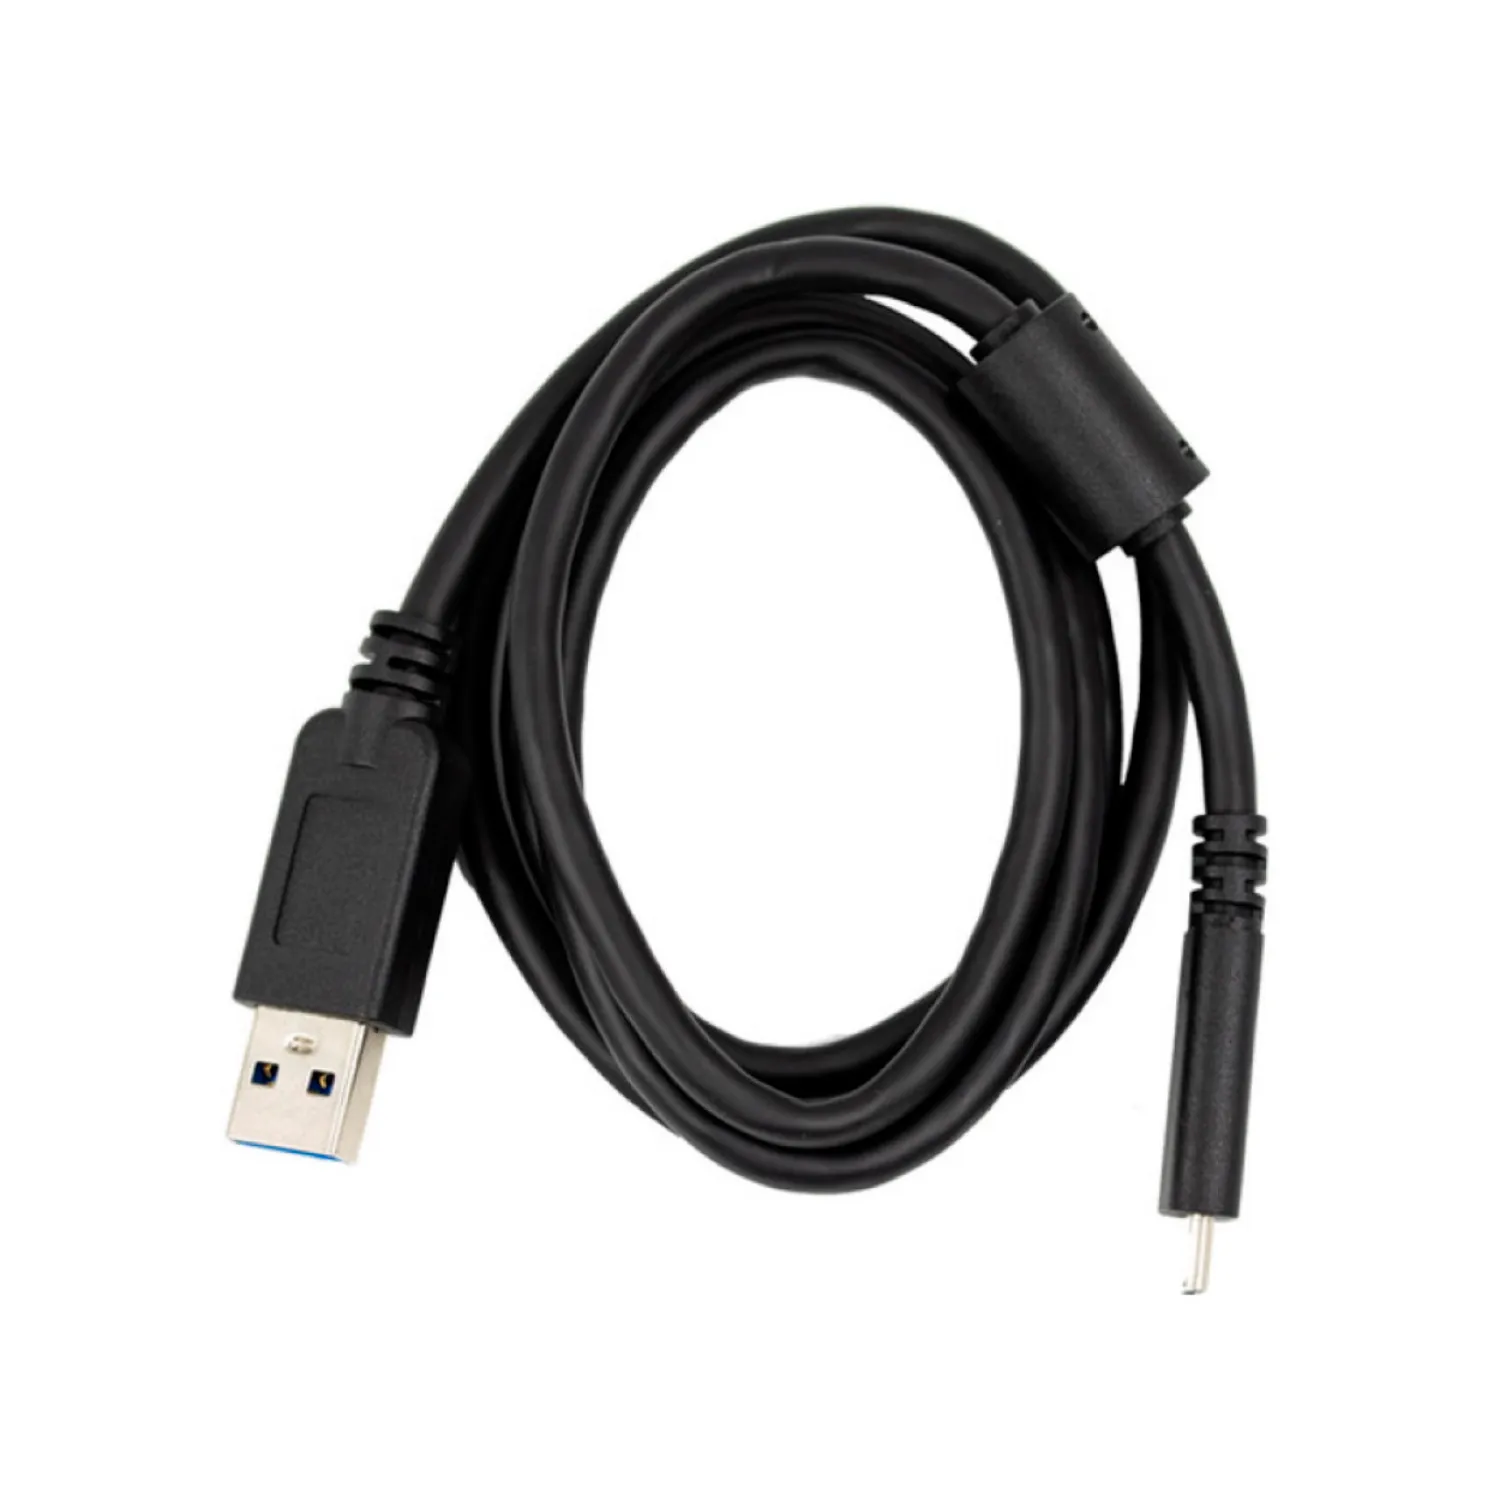 Sigma USB Cable (A-C) SUC-11 for FP Camera